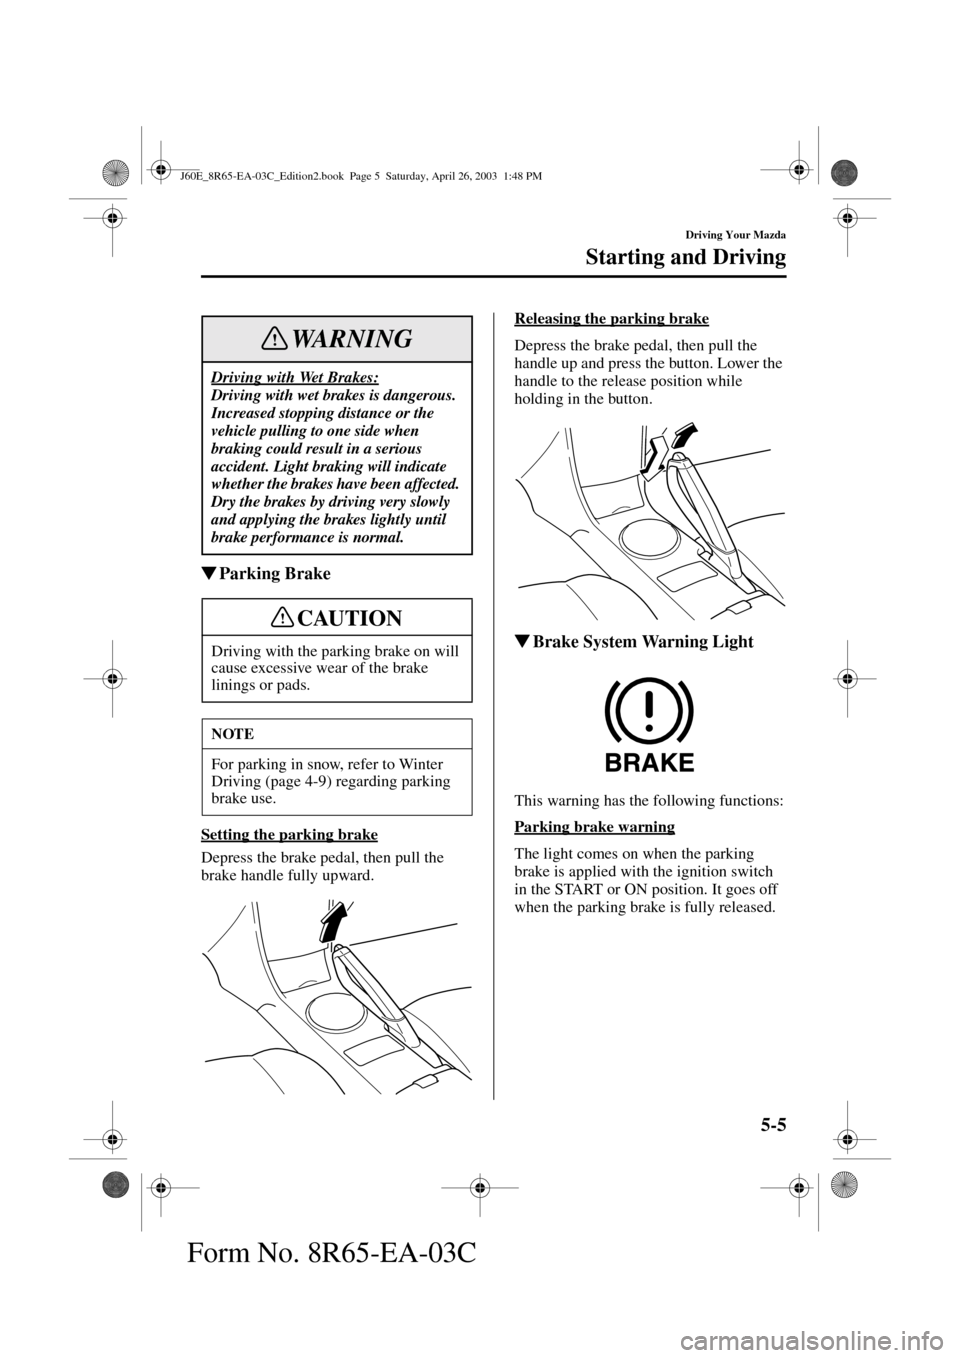 MAZDA MODEL RX 8 2004  Owners Manual (in English) 5-5
Driving Your Mazda
Starting and Driving
Form No. 8R65-EA-03C
Parking Brake
Setting the parking brake
Depress the brake pedal, then pull the 
brake handle fully upward.Releasing the parking brake
